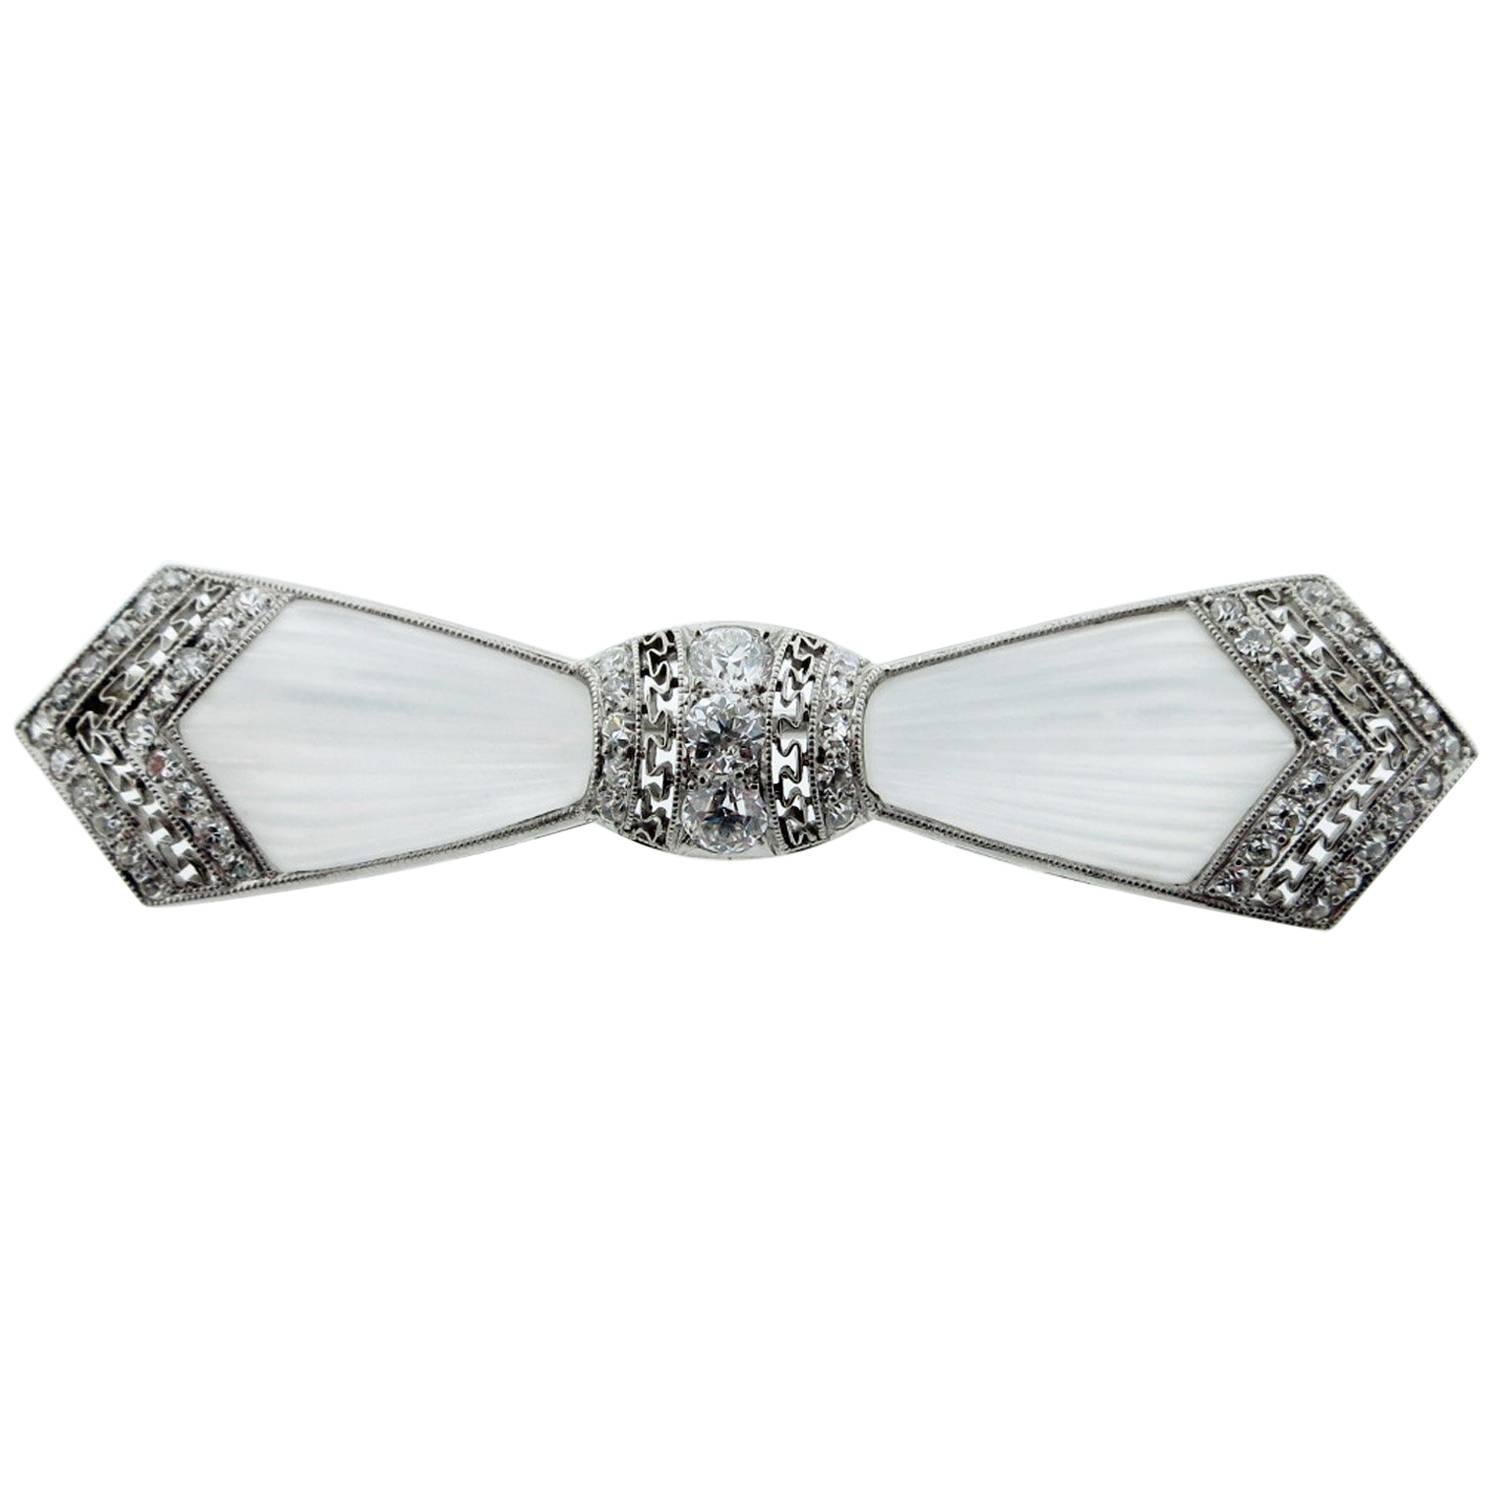 Marcus & Co. Art Deco Platinum Diamond and Carved Crystal Bow Pin For Sale